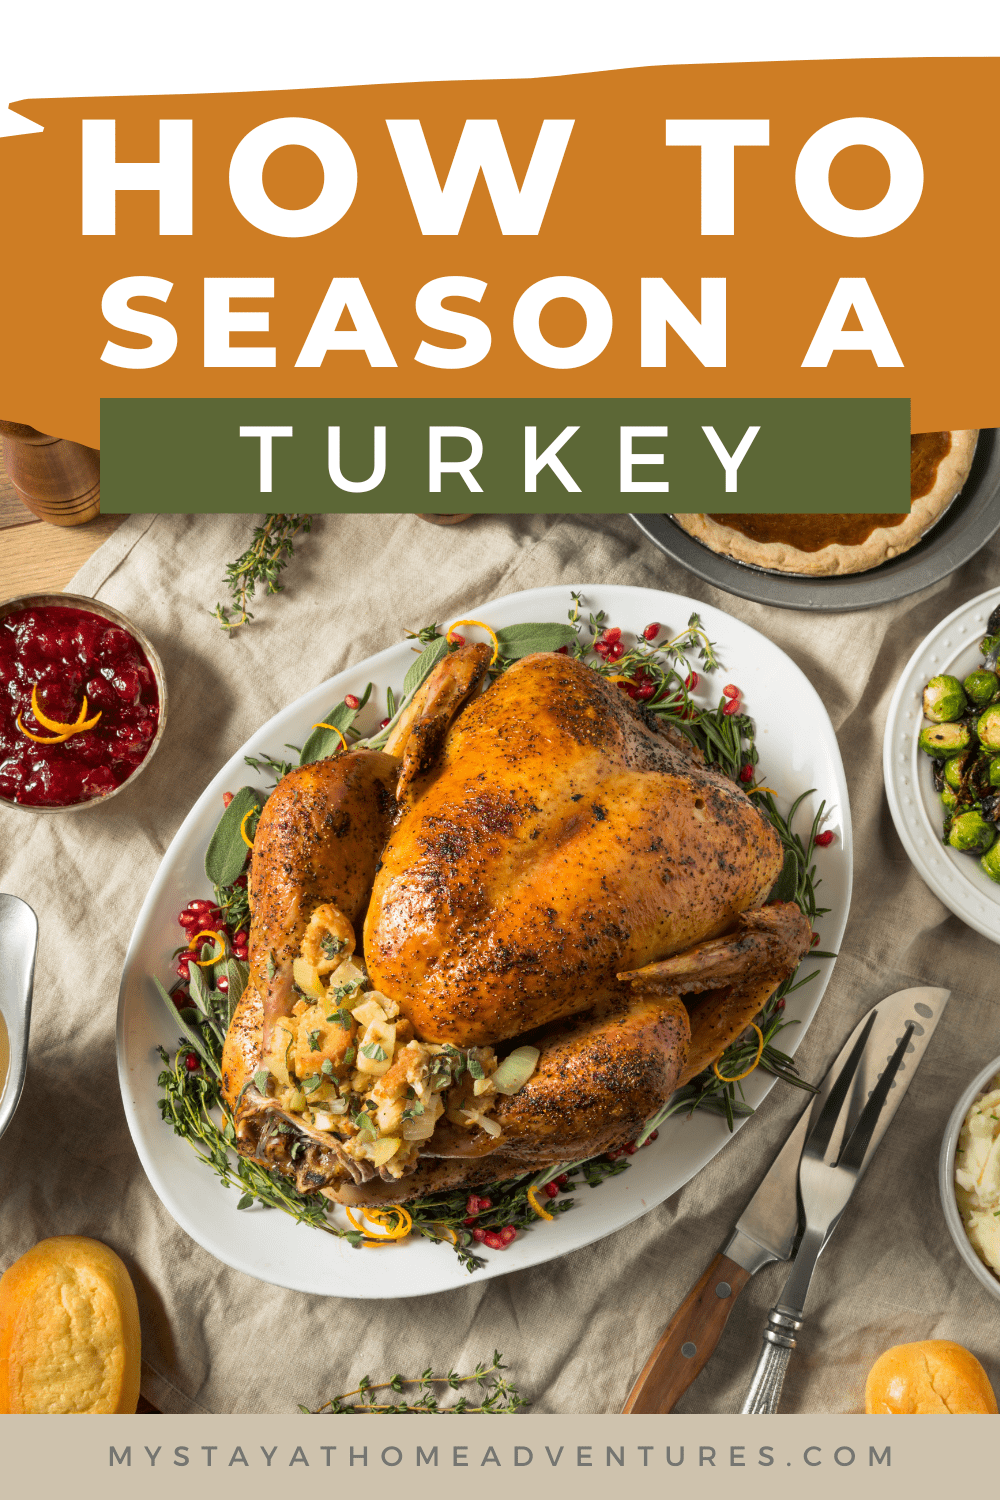 Learn how to season a turkey properly. A flavorless bird is almost as sad as a dry one. Follow these tips for delicious, juicy birds every time! via @mystayathome